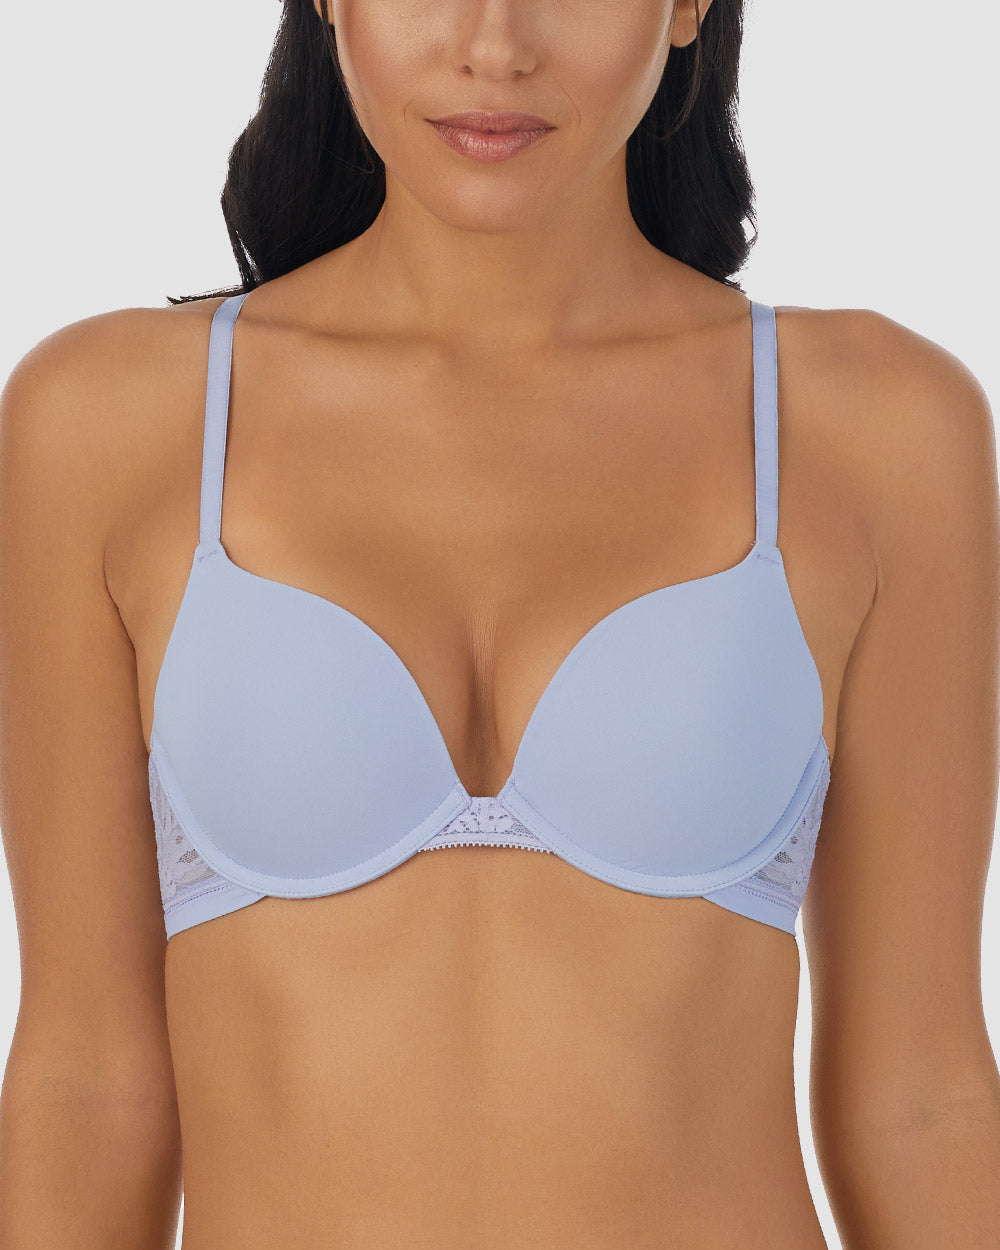 A lady wearing baby lavender Sleek Micro Push Up Bra With Lace